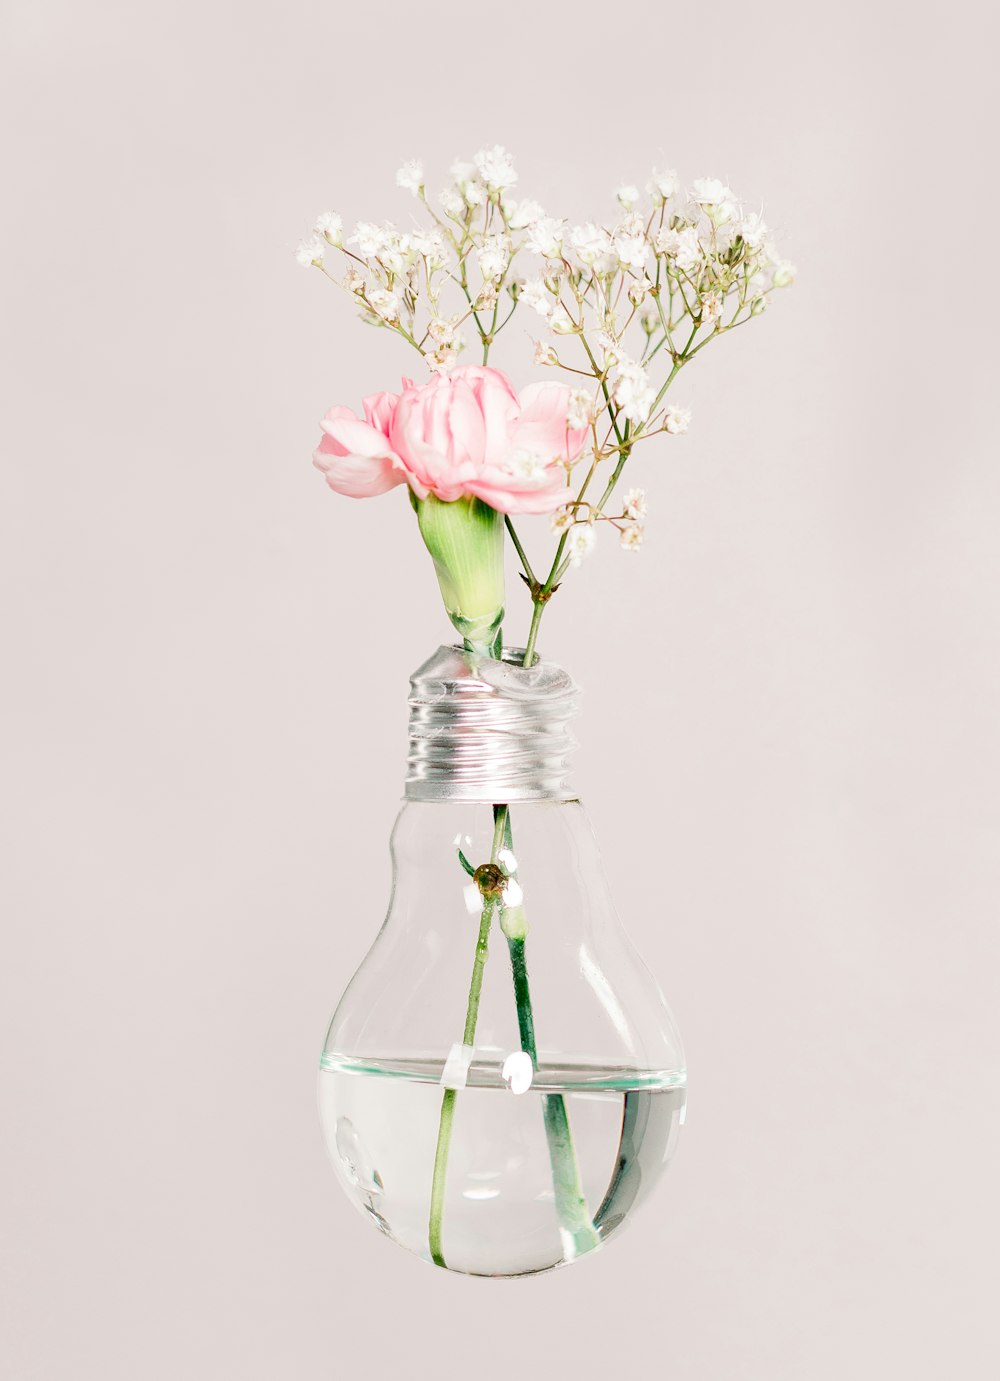 white and pink petaled flowers in clear glass LED bulb vase